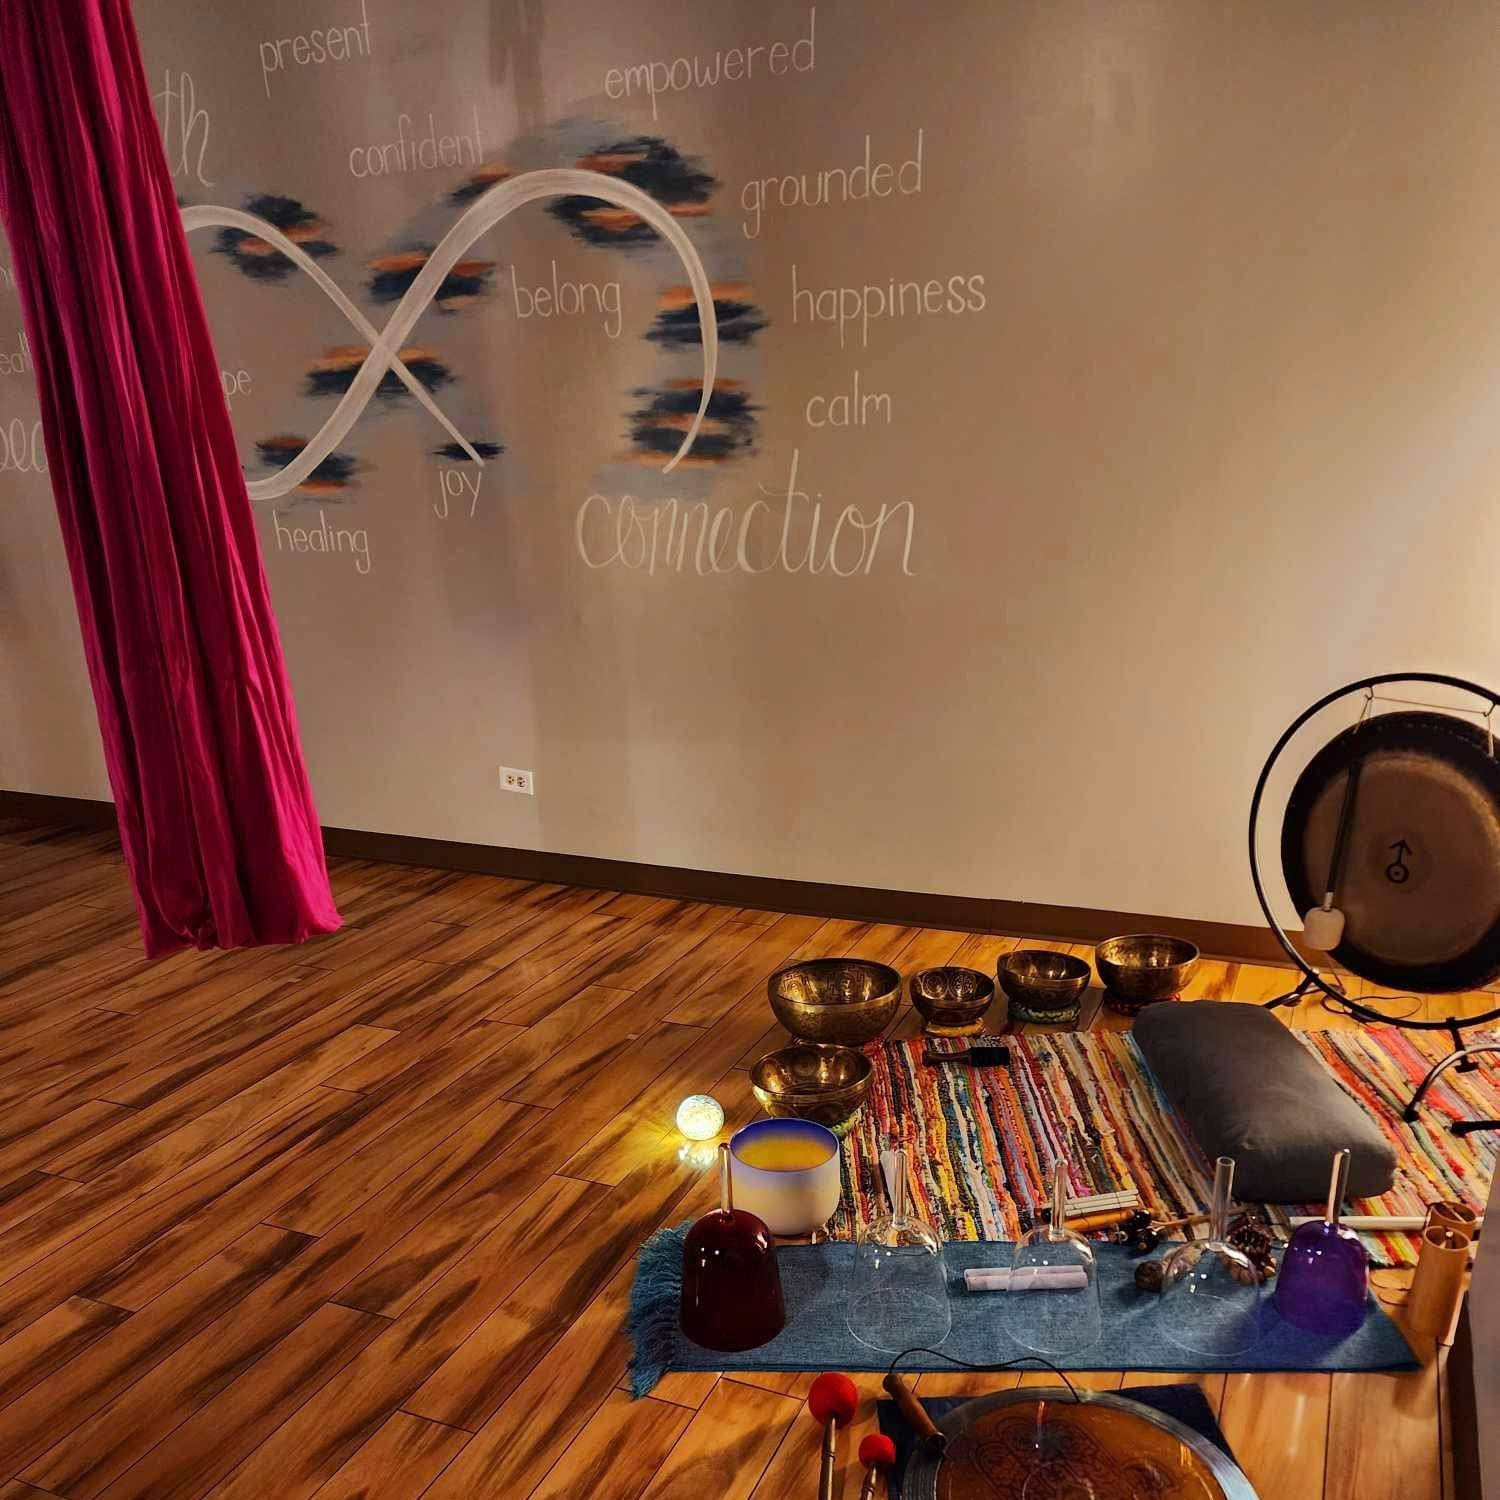 Jenny is back on Friday, May 10 at 7pm for her amazing sound healing experience. Join her in the silks or supported on your mat with props. This is an event not to miss! All relaxation, all levels. Limited space available so grab your spot before it 